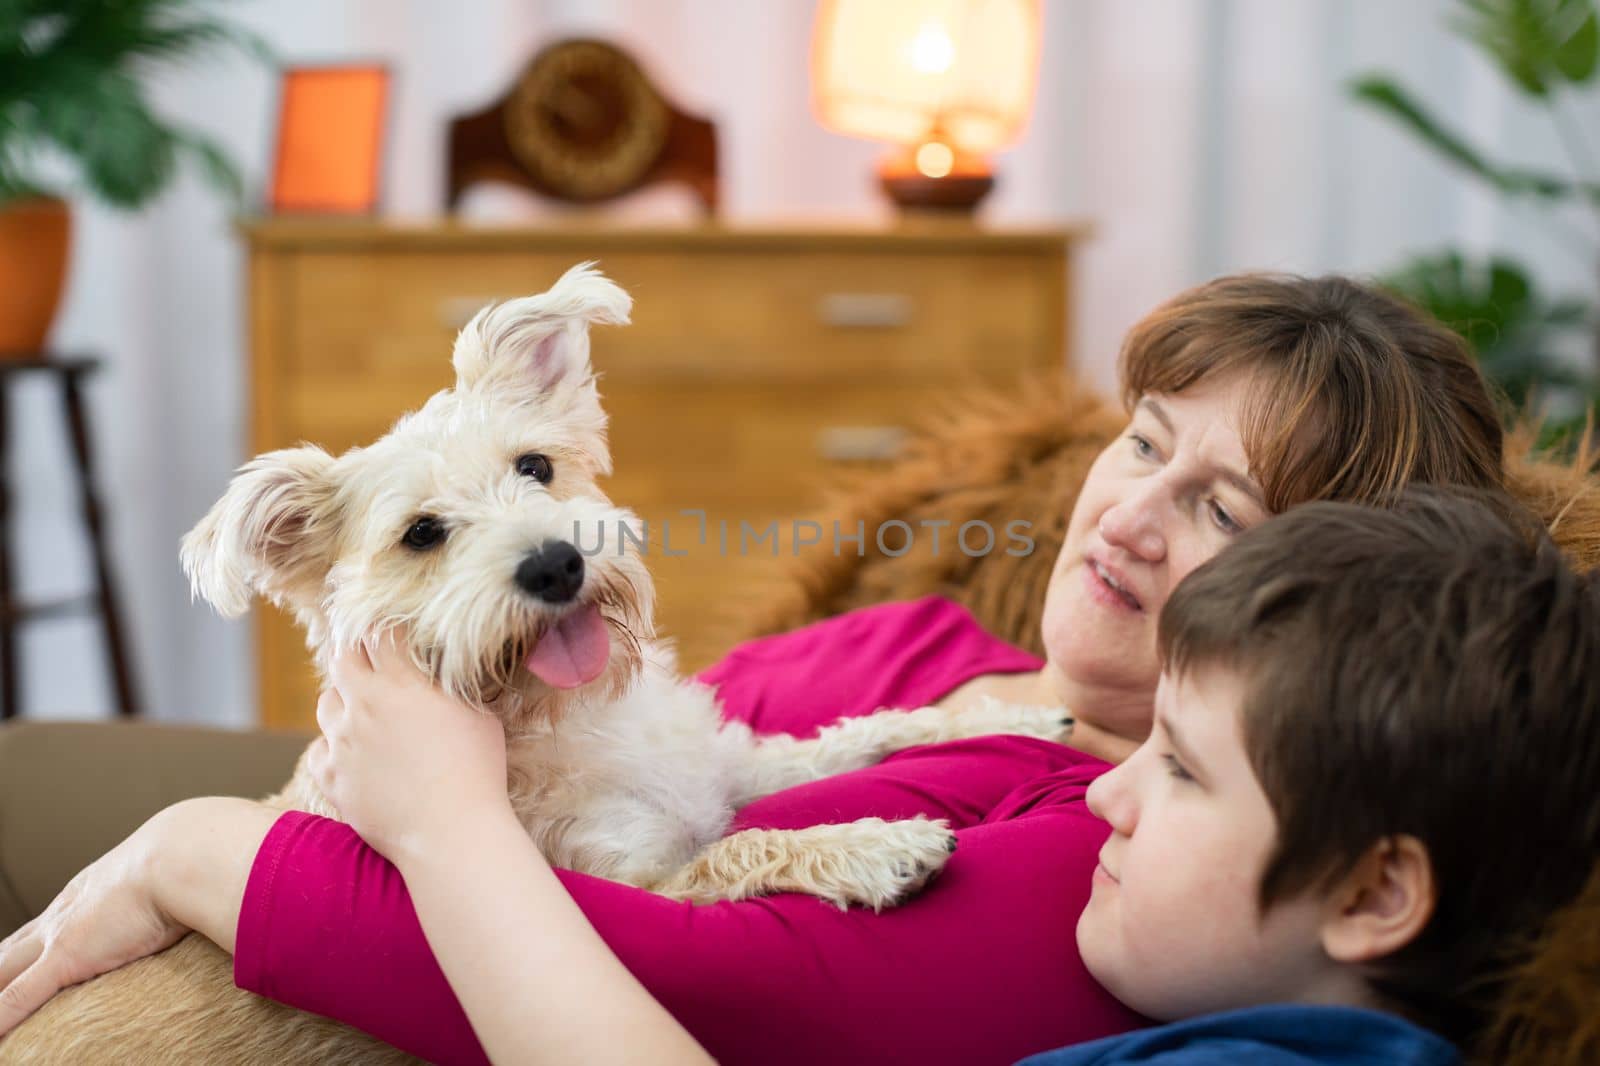 The shaggy dog is held in her arms by her mother and her son cuddles up to her and looks at the beloved pet .